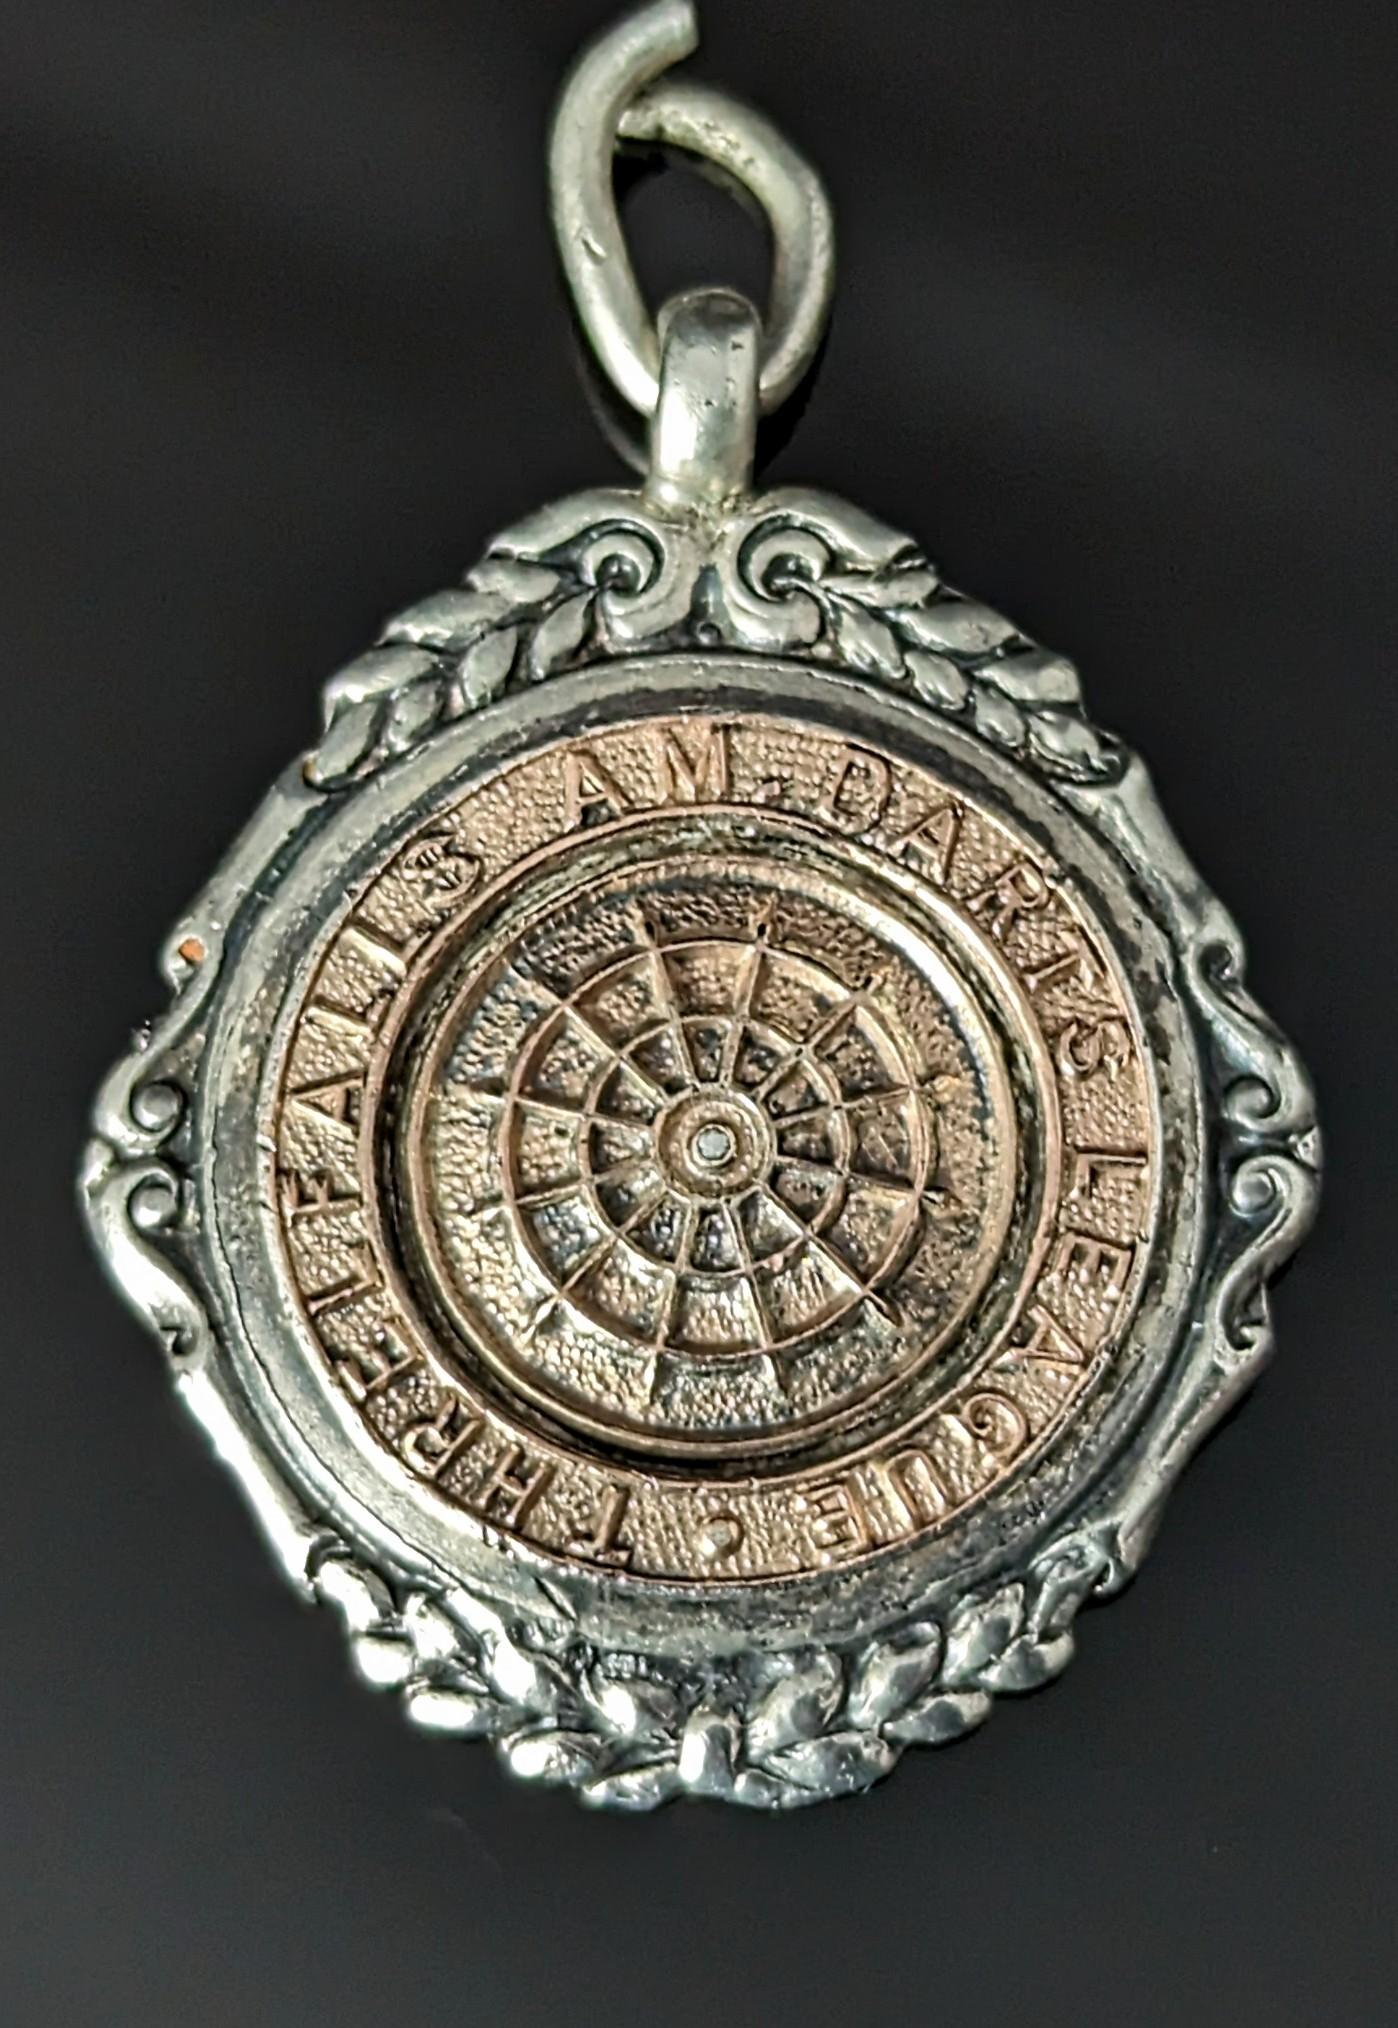 A fantastic vintage Art Deco sterling silver and rose gold watch fob.

It is a circular shaped fob with an applied repousse rose gold dartboard to the front surrounded by scrolls and foliate.

The text around the board reads; Threlfalls AM Darts